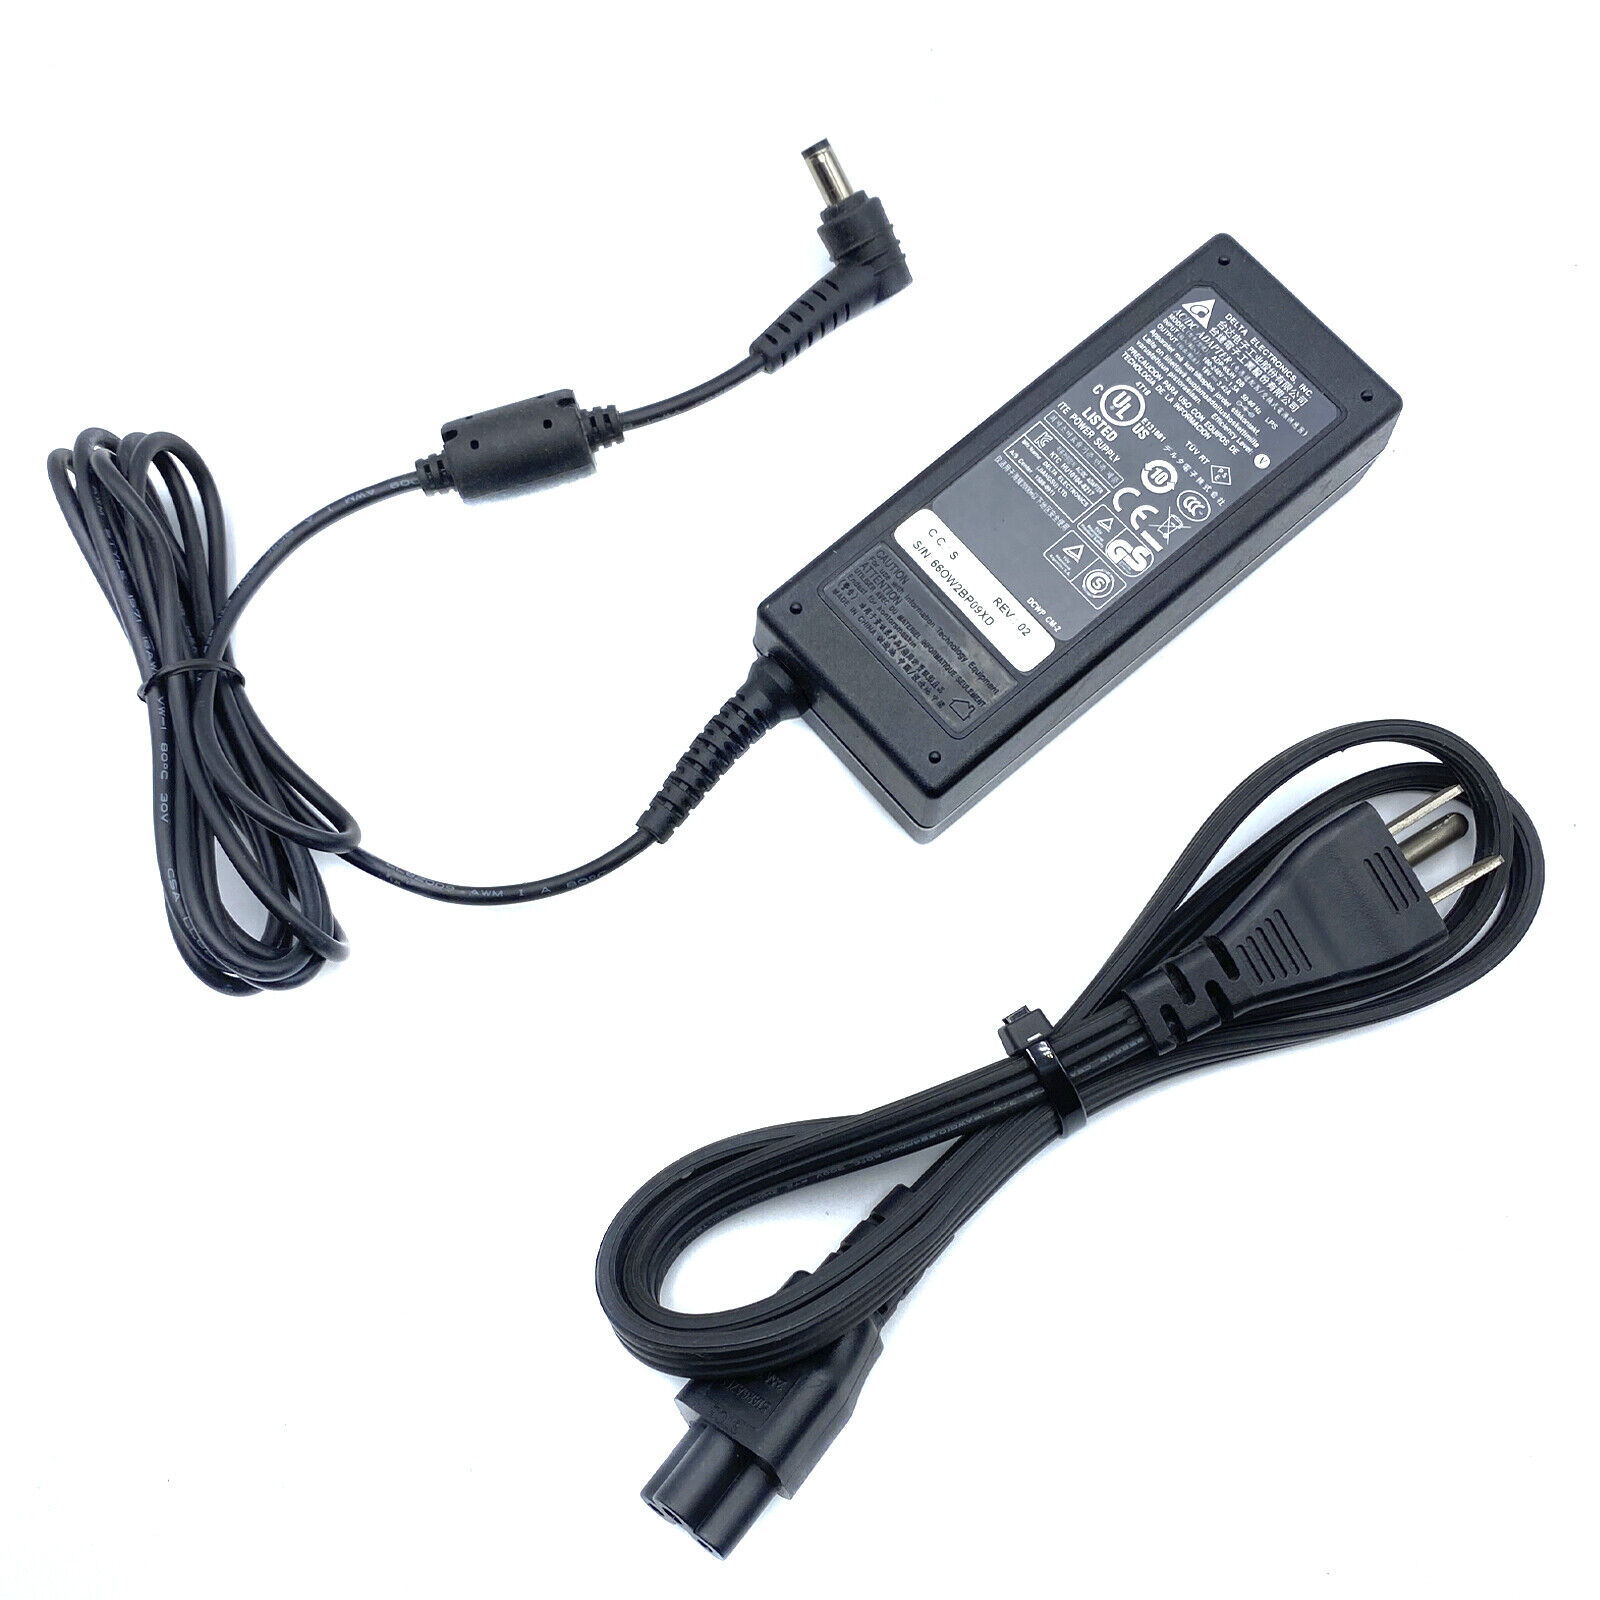 Genuine 19V 3.42A Power Supply Charger for Asus R554L R513C X555L OEM W/P.Cord